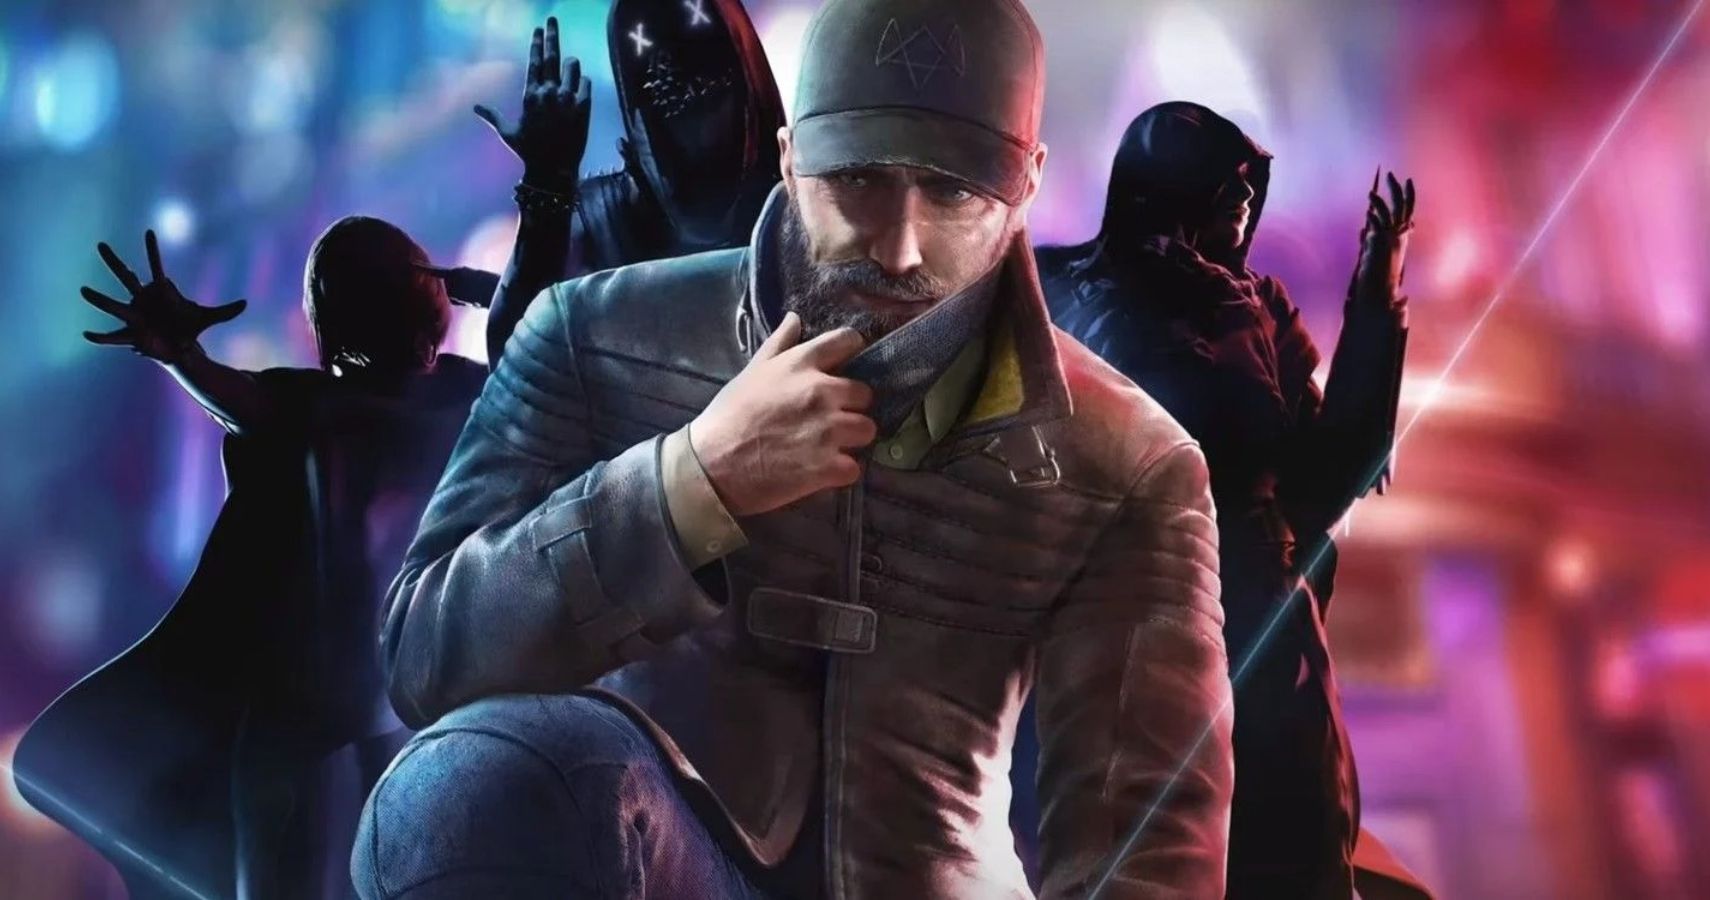 Watch Dogs Legion welcomes players to the resistance